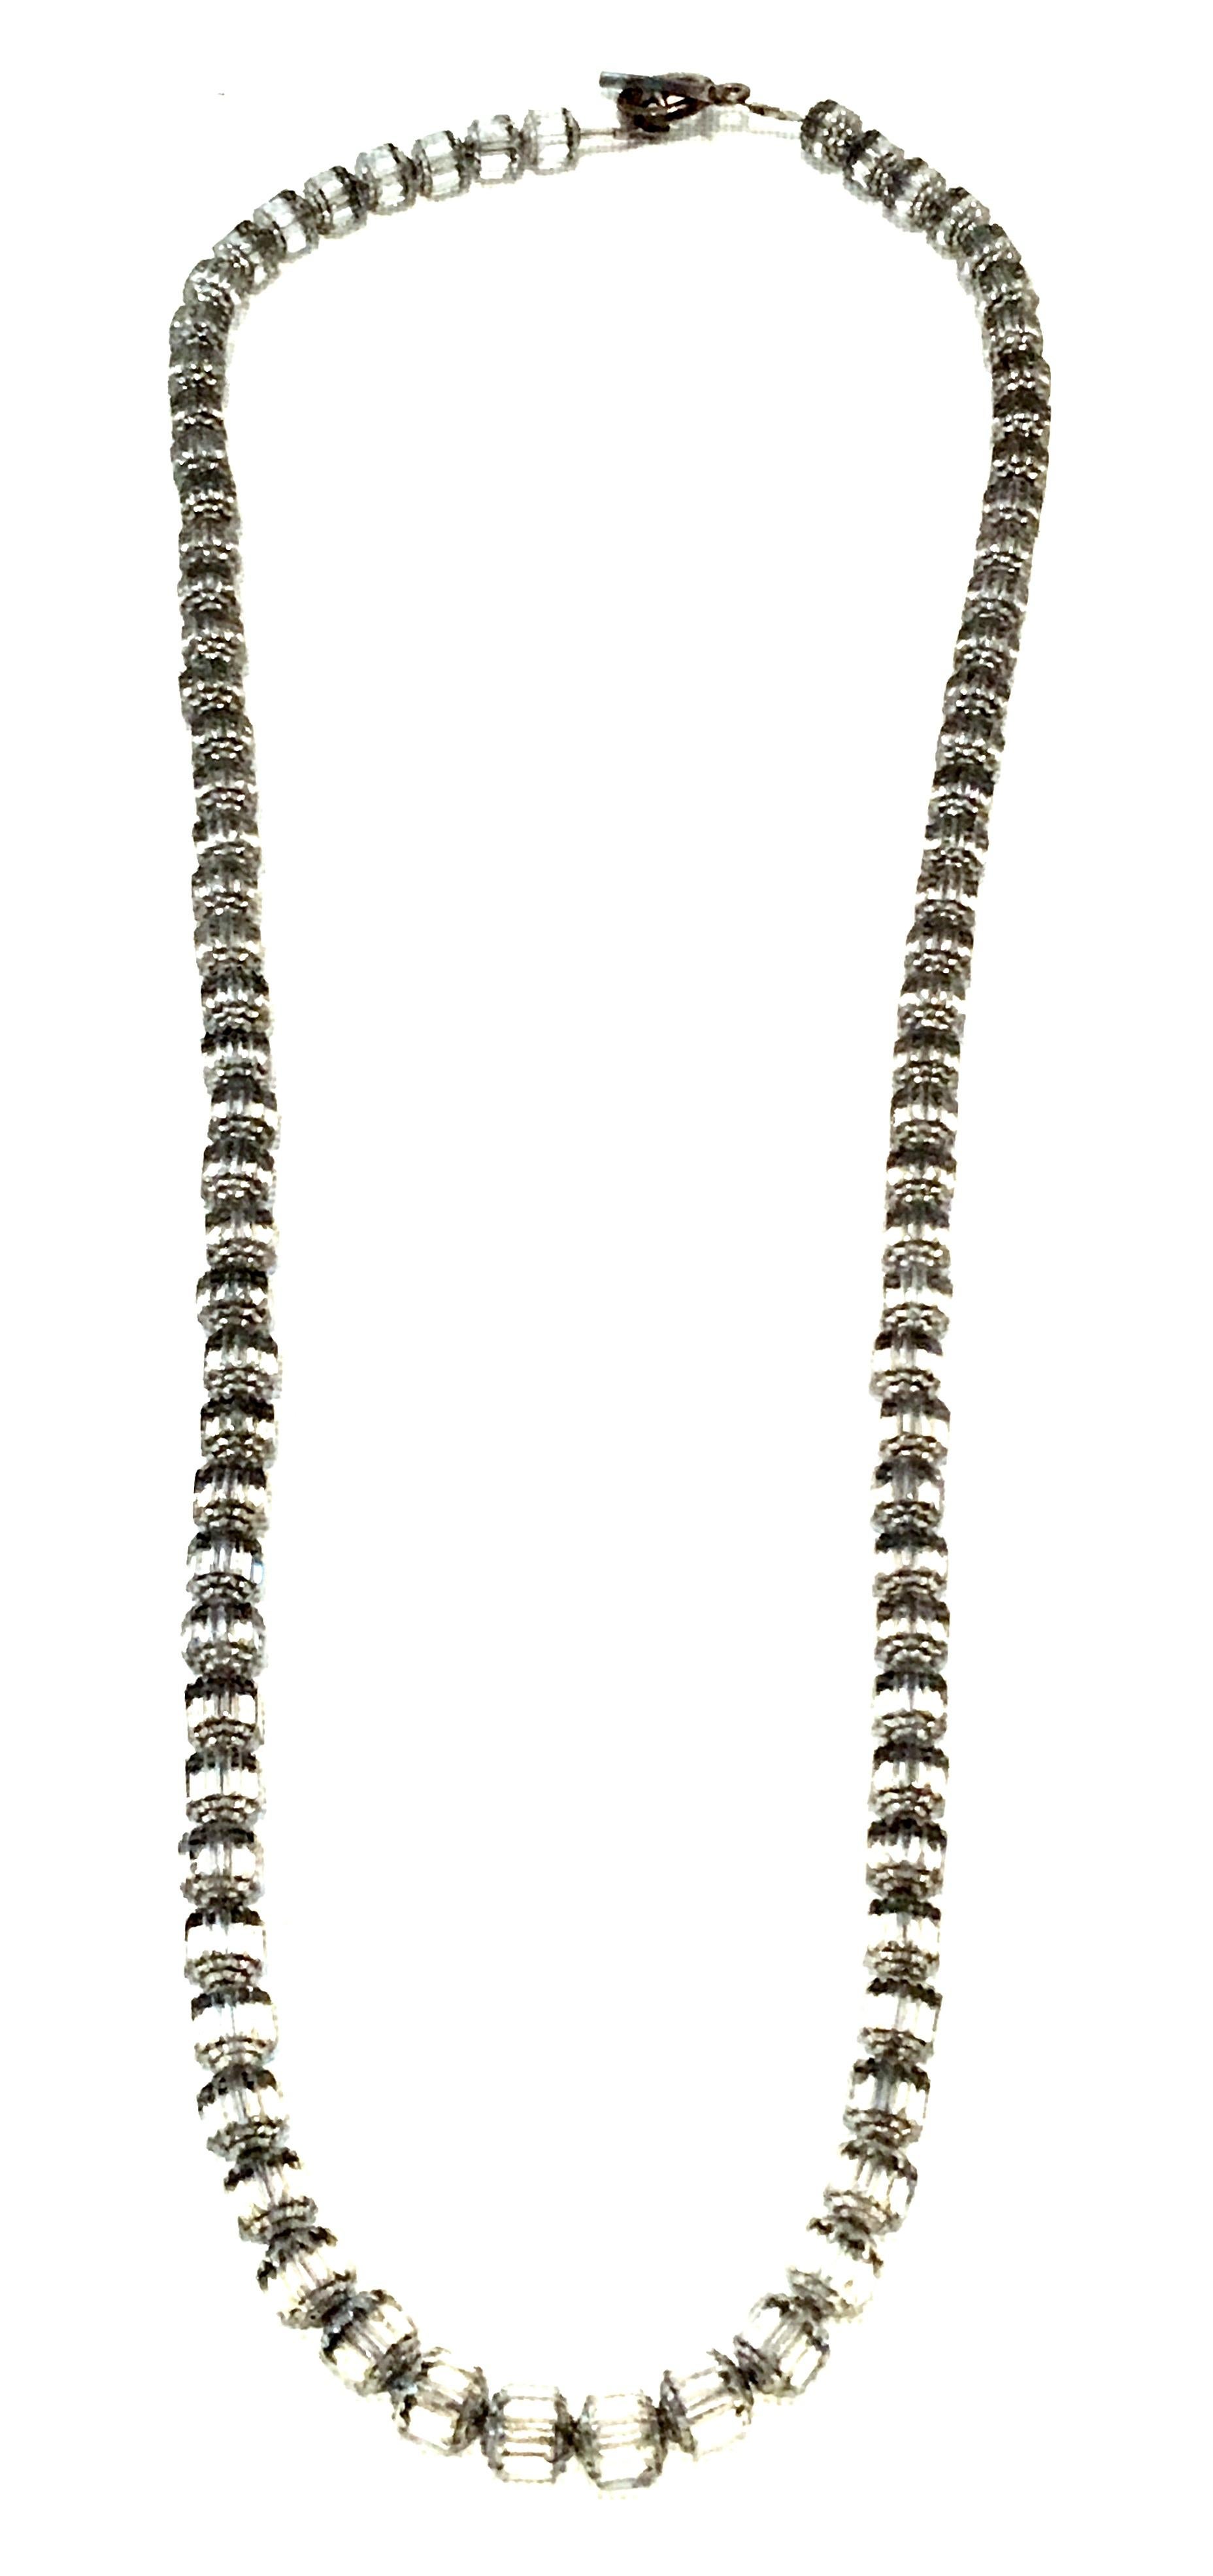 20th Century Cut Austrian Crystal & 925 Sterling Beaded Necklace. Features Austrian cut and faceted tubular smoked topaz crystal with grommet style rondelle's. Strung on 925 sterling wire with toggle style clasp. Clasp marked 925. Can be worn single